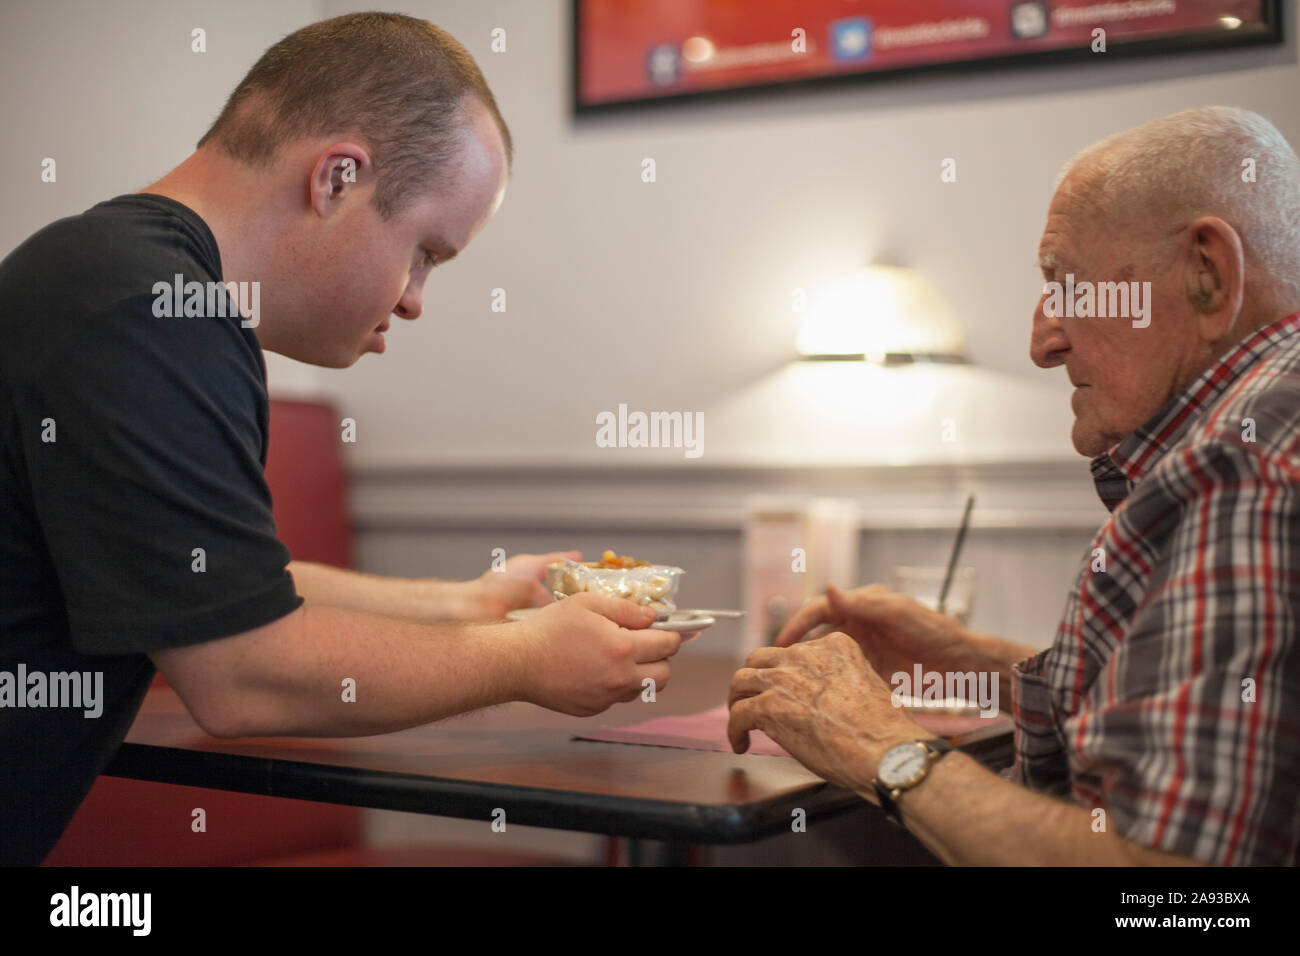 Waiter with Down Syndrome serving food to customer in a restaurant Stock Photo